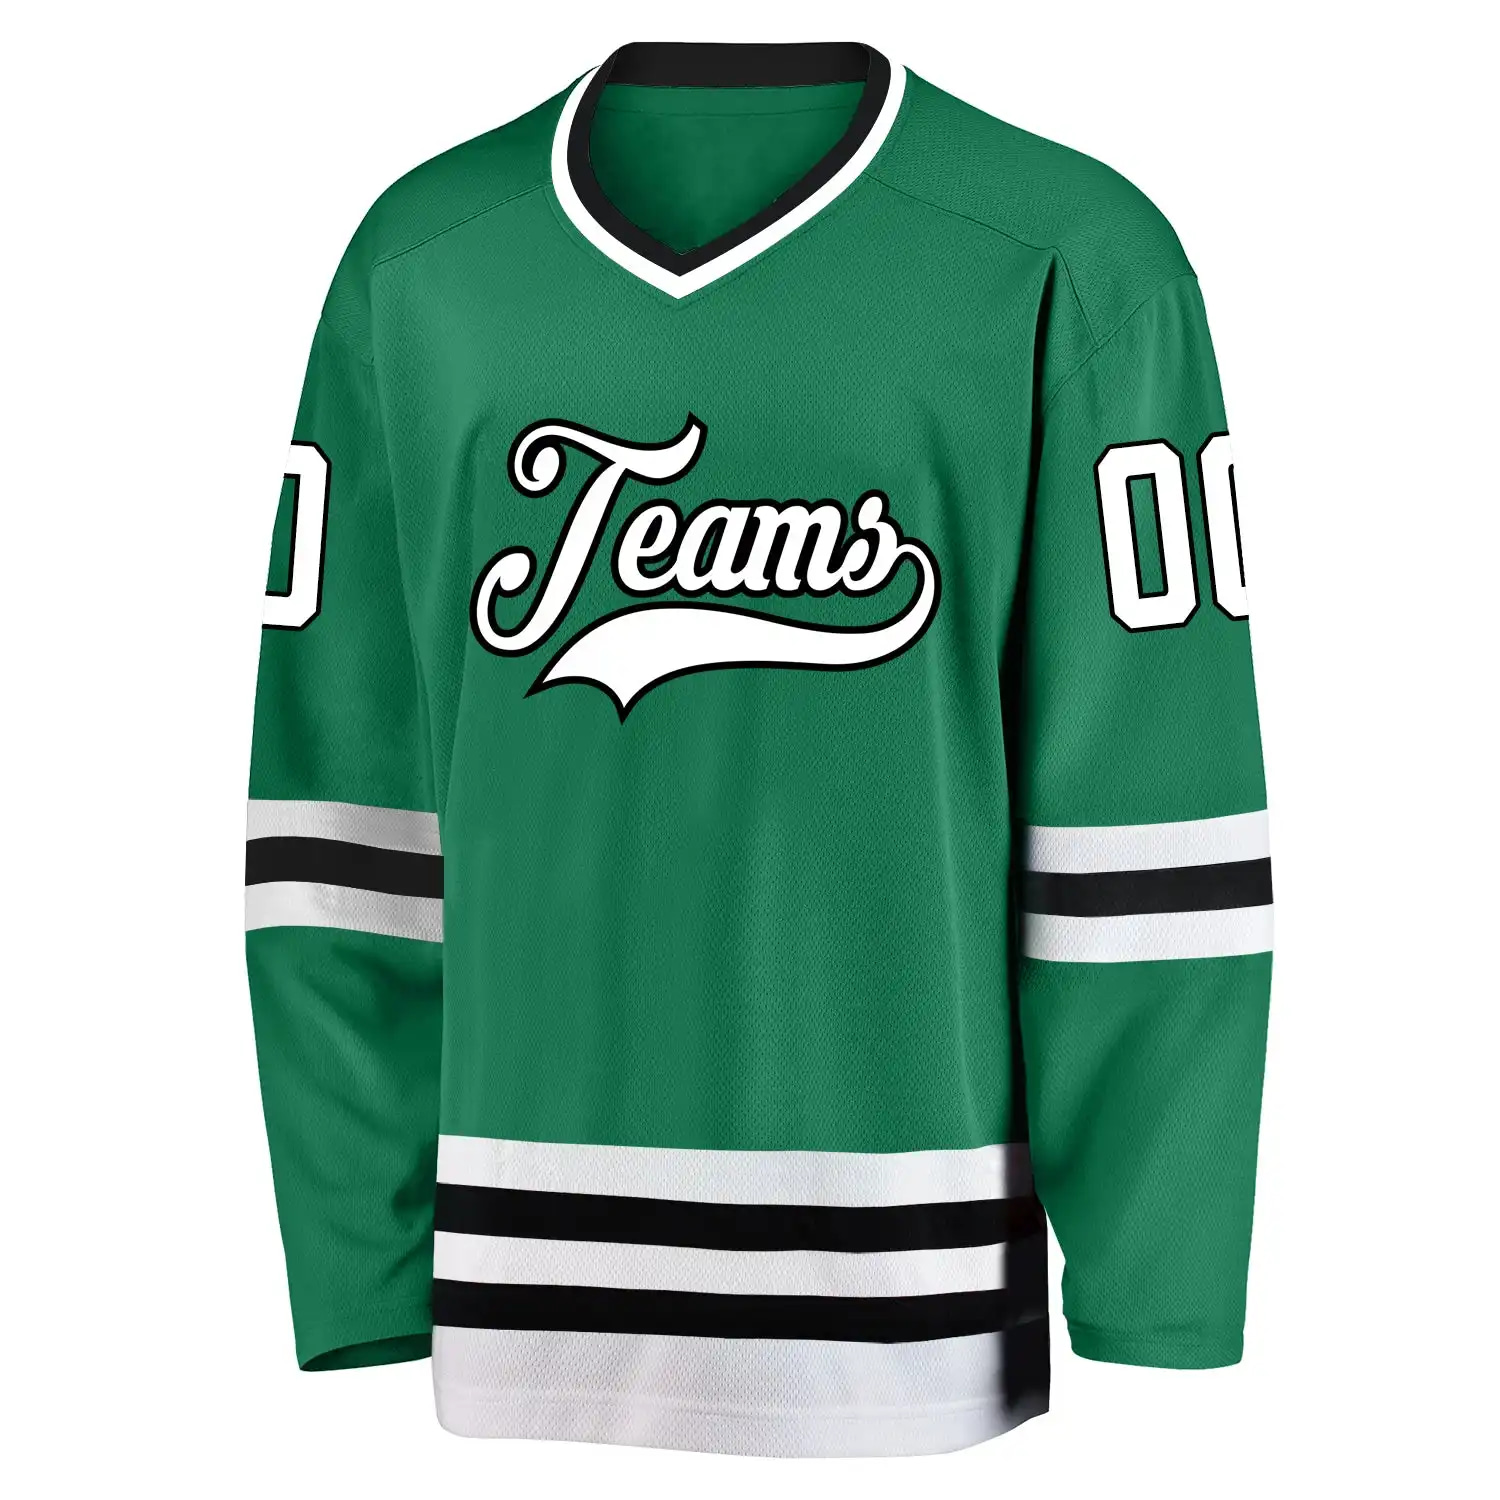 Inktee Store - Stitched And Print Kelly Green White-Black Hockey Jersey Custom Image